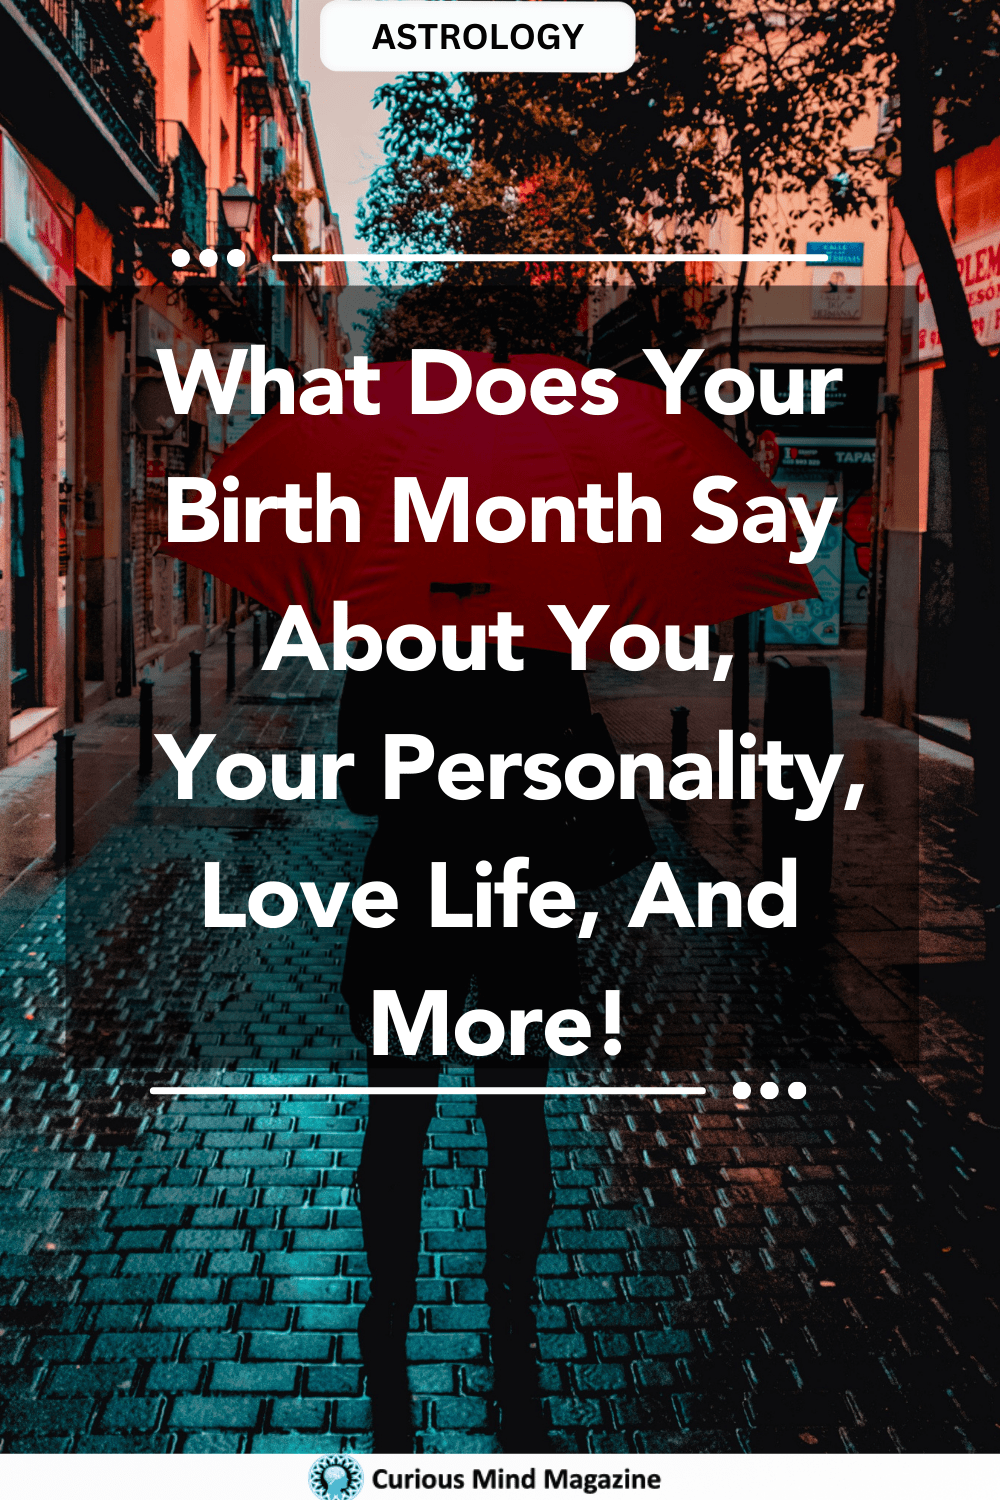 What Does Your Birth Month Say About You, Your Personality, Love Life, And More!